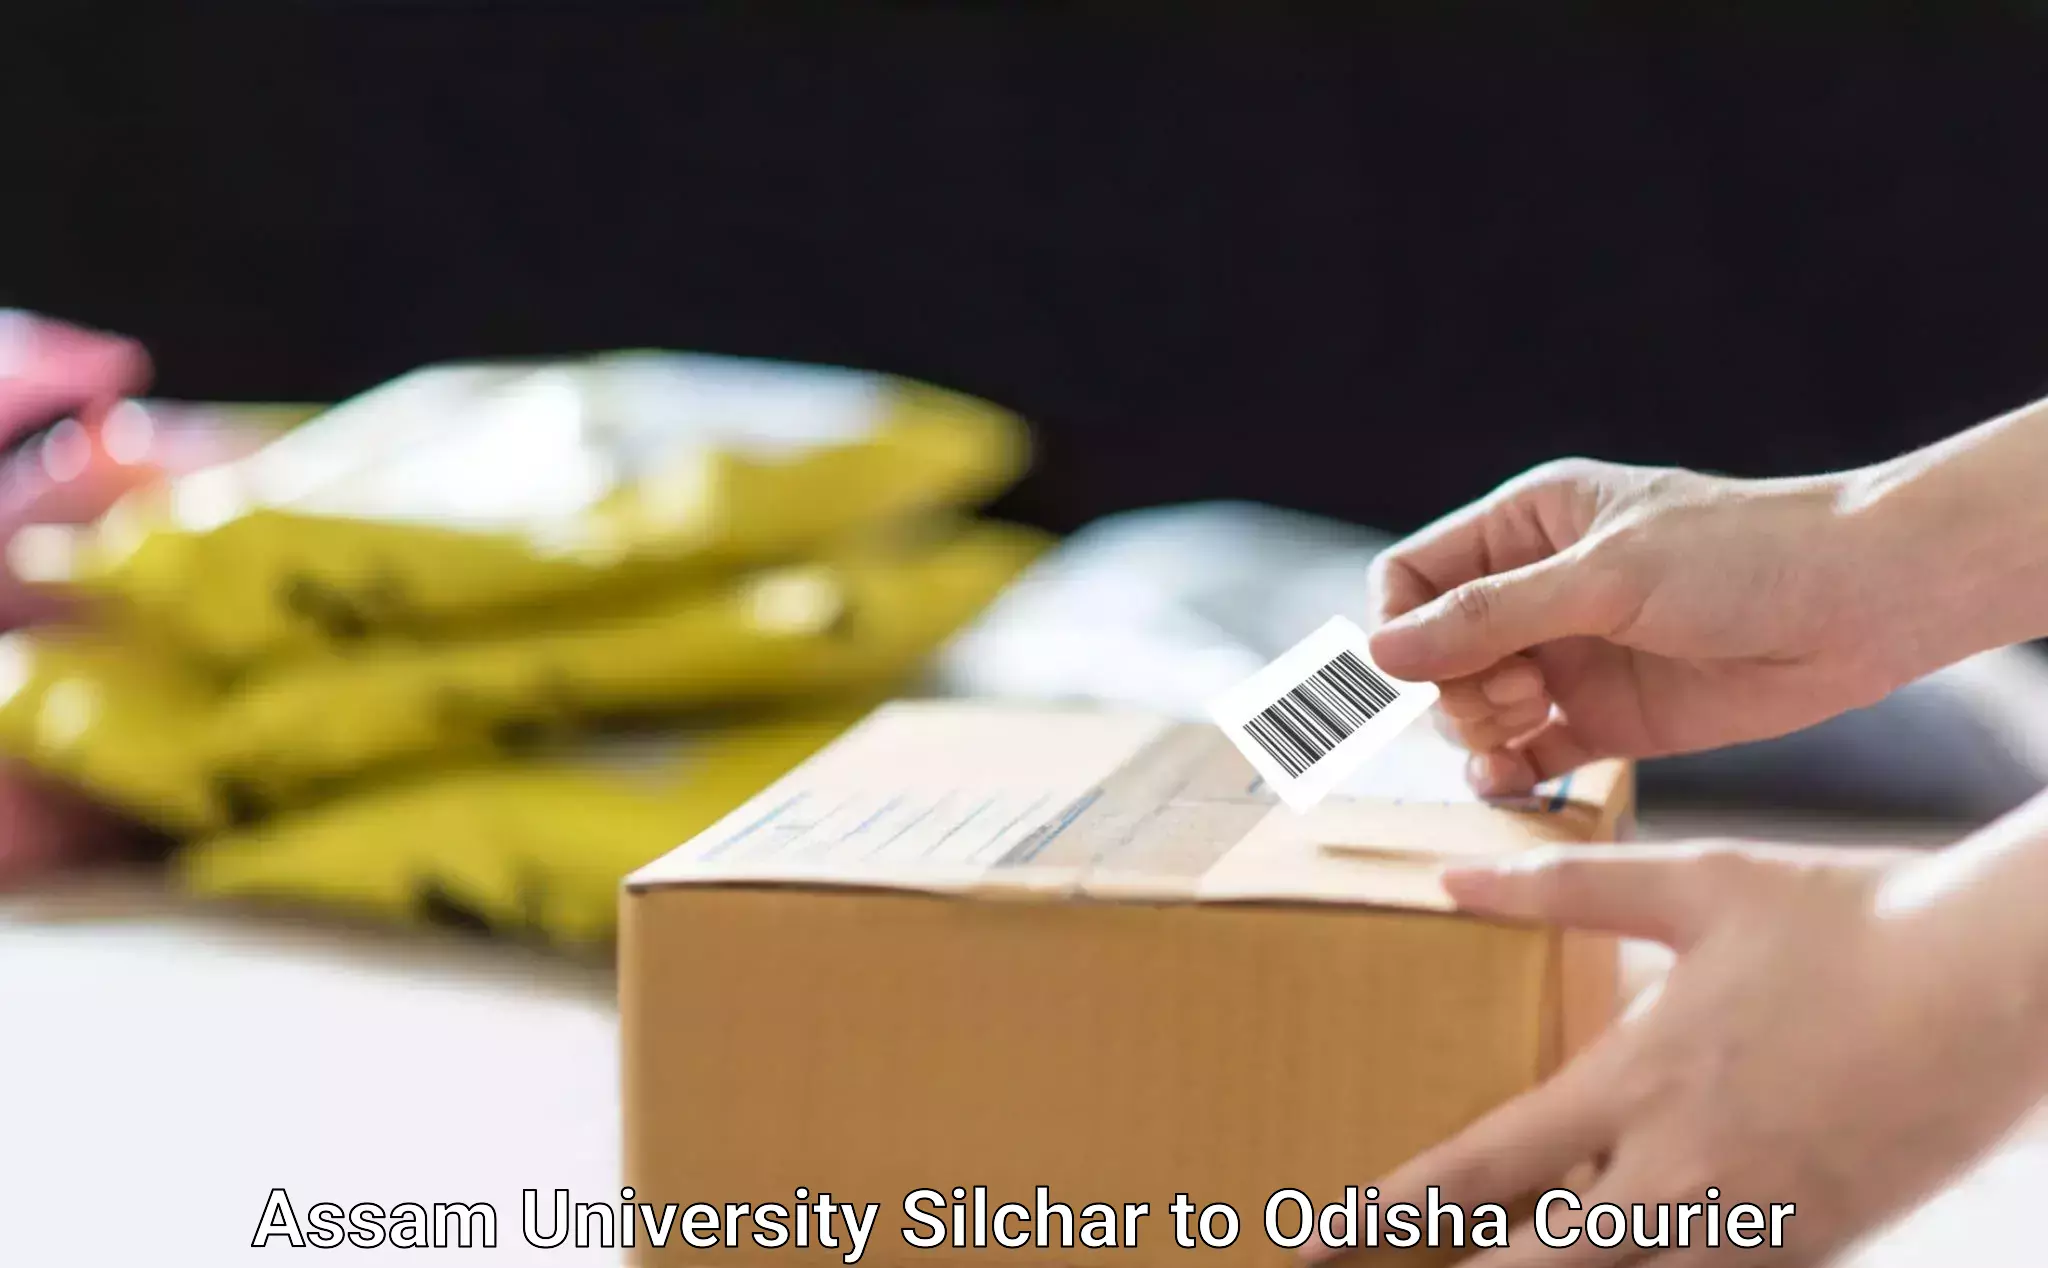 Efficient courier operations Assam University Silchar to Dunguripali